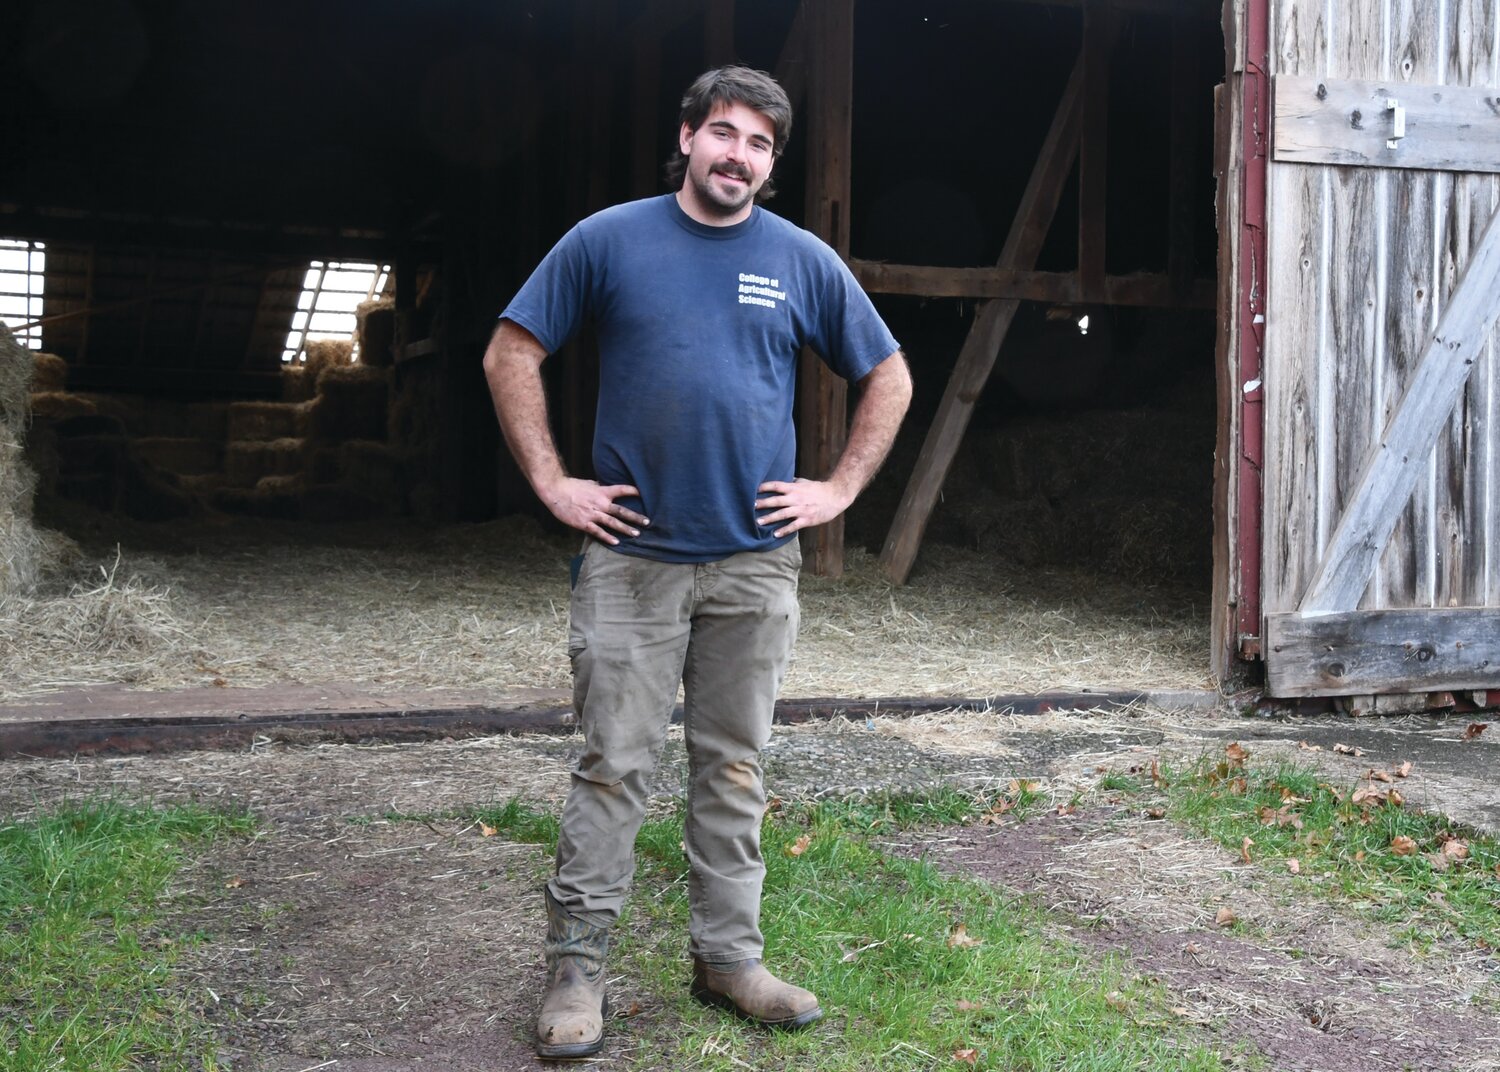 For Bedminster hay farmer Joe Dise, 24, agriculture is a force for doing good in the world.